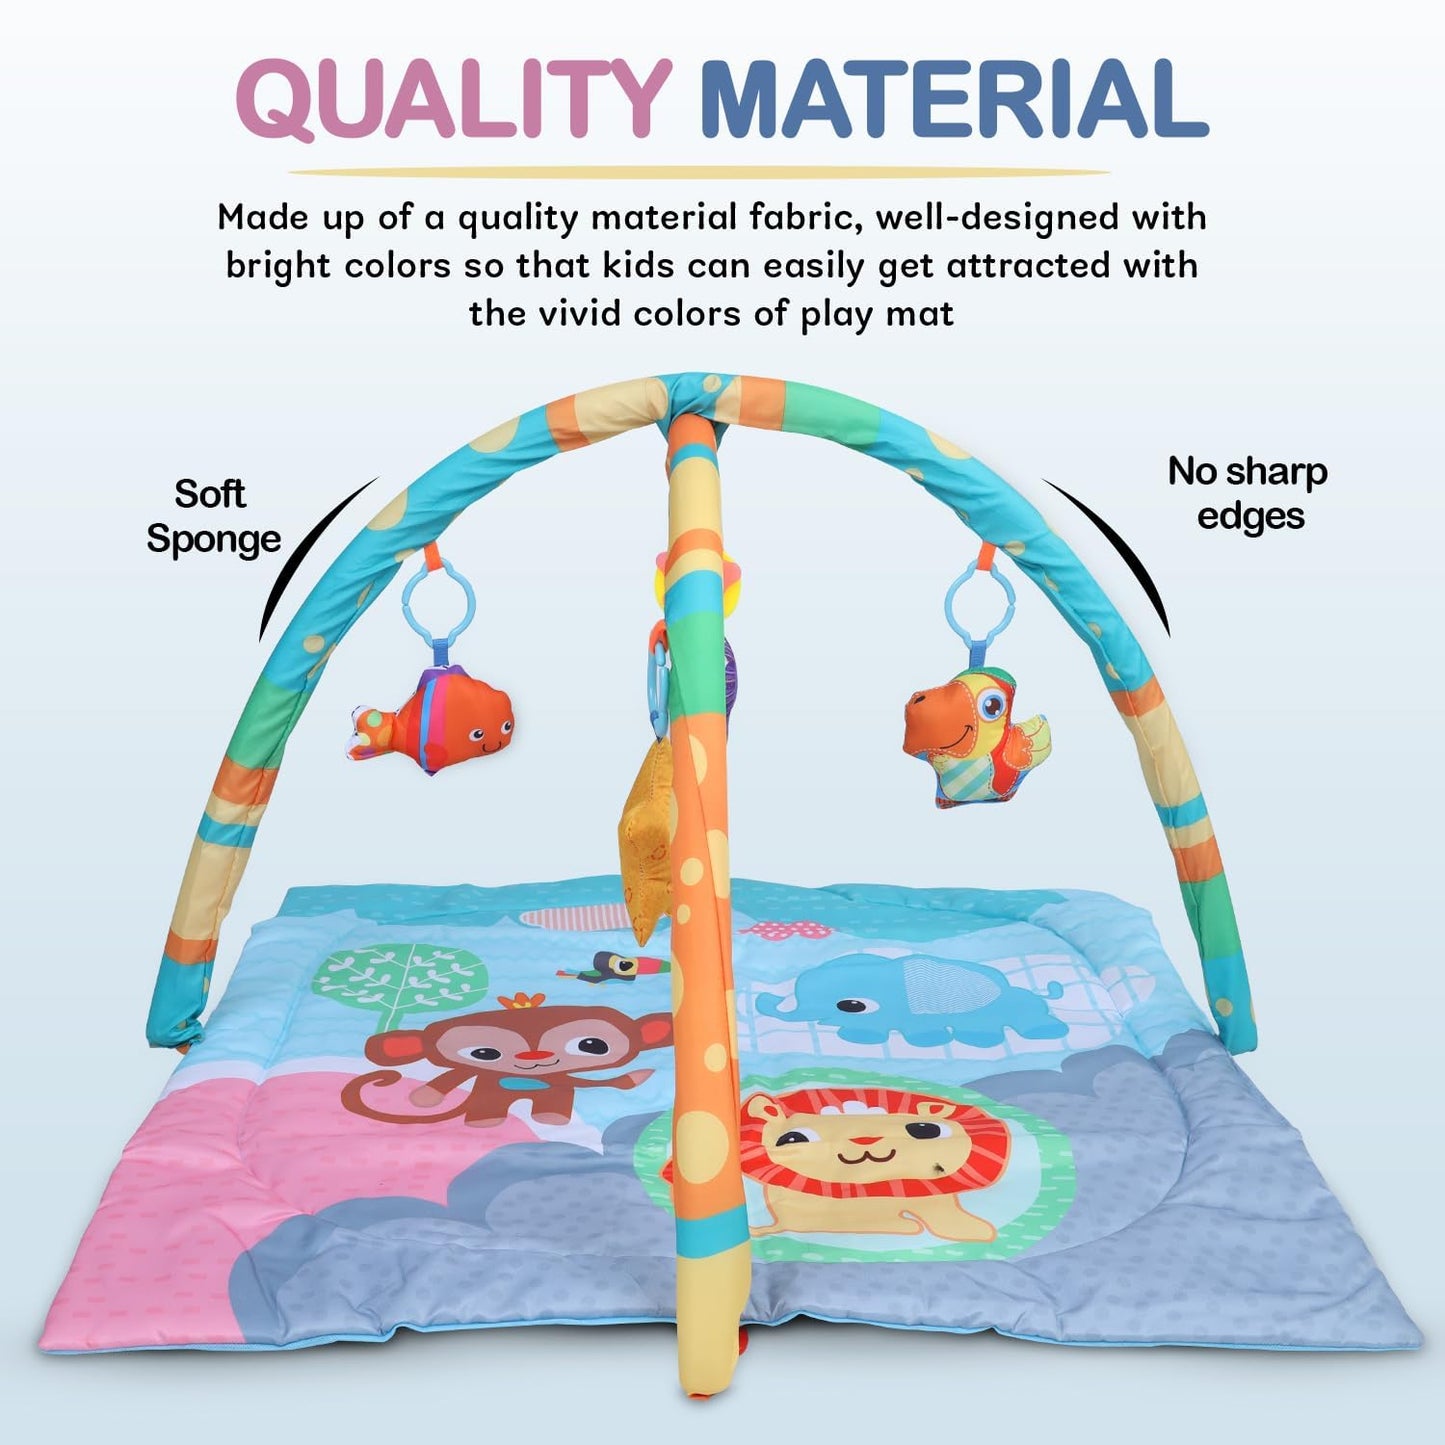 Baby Bloom 2 in 1 Cotton Playgym with Rattle for Babies - Square Shape